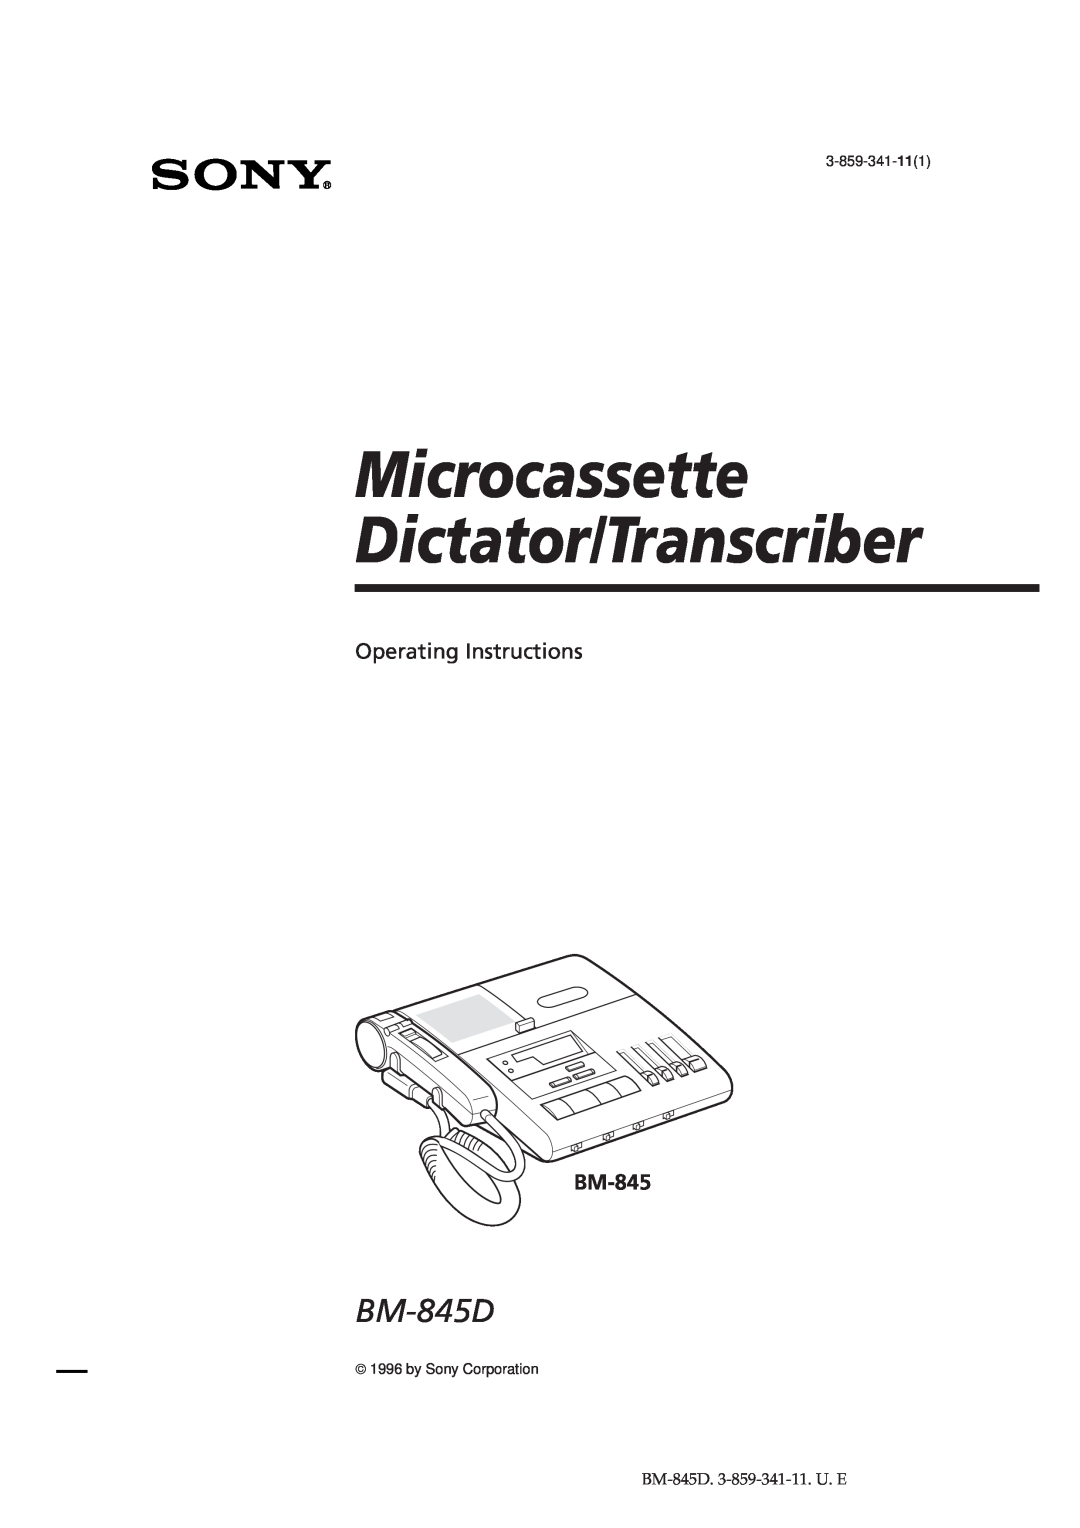 Sony BM-845D manual Microcassette Dictator/Transcriber, Operating Instructions, 3-859-341-111, by Sony Corporation 